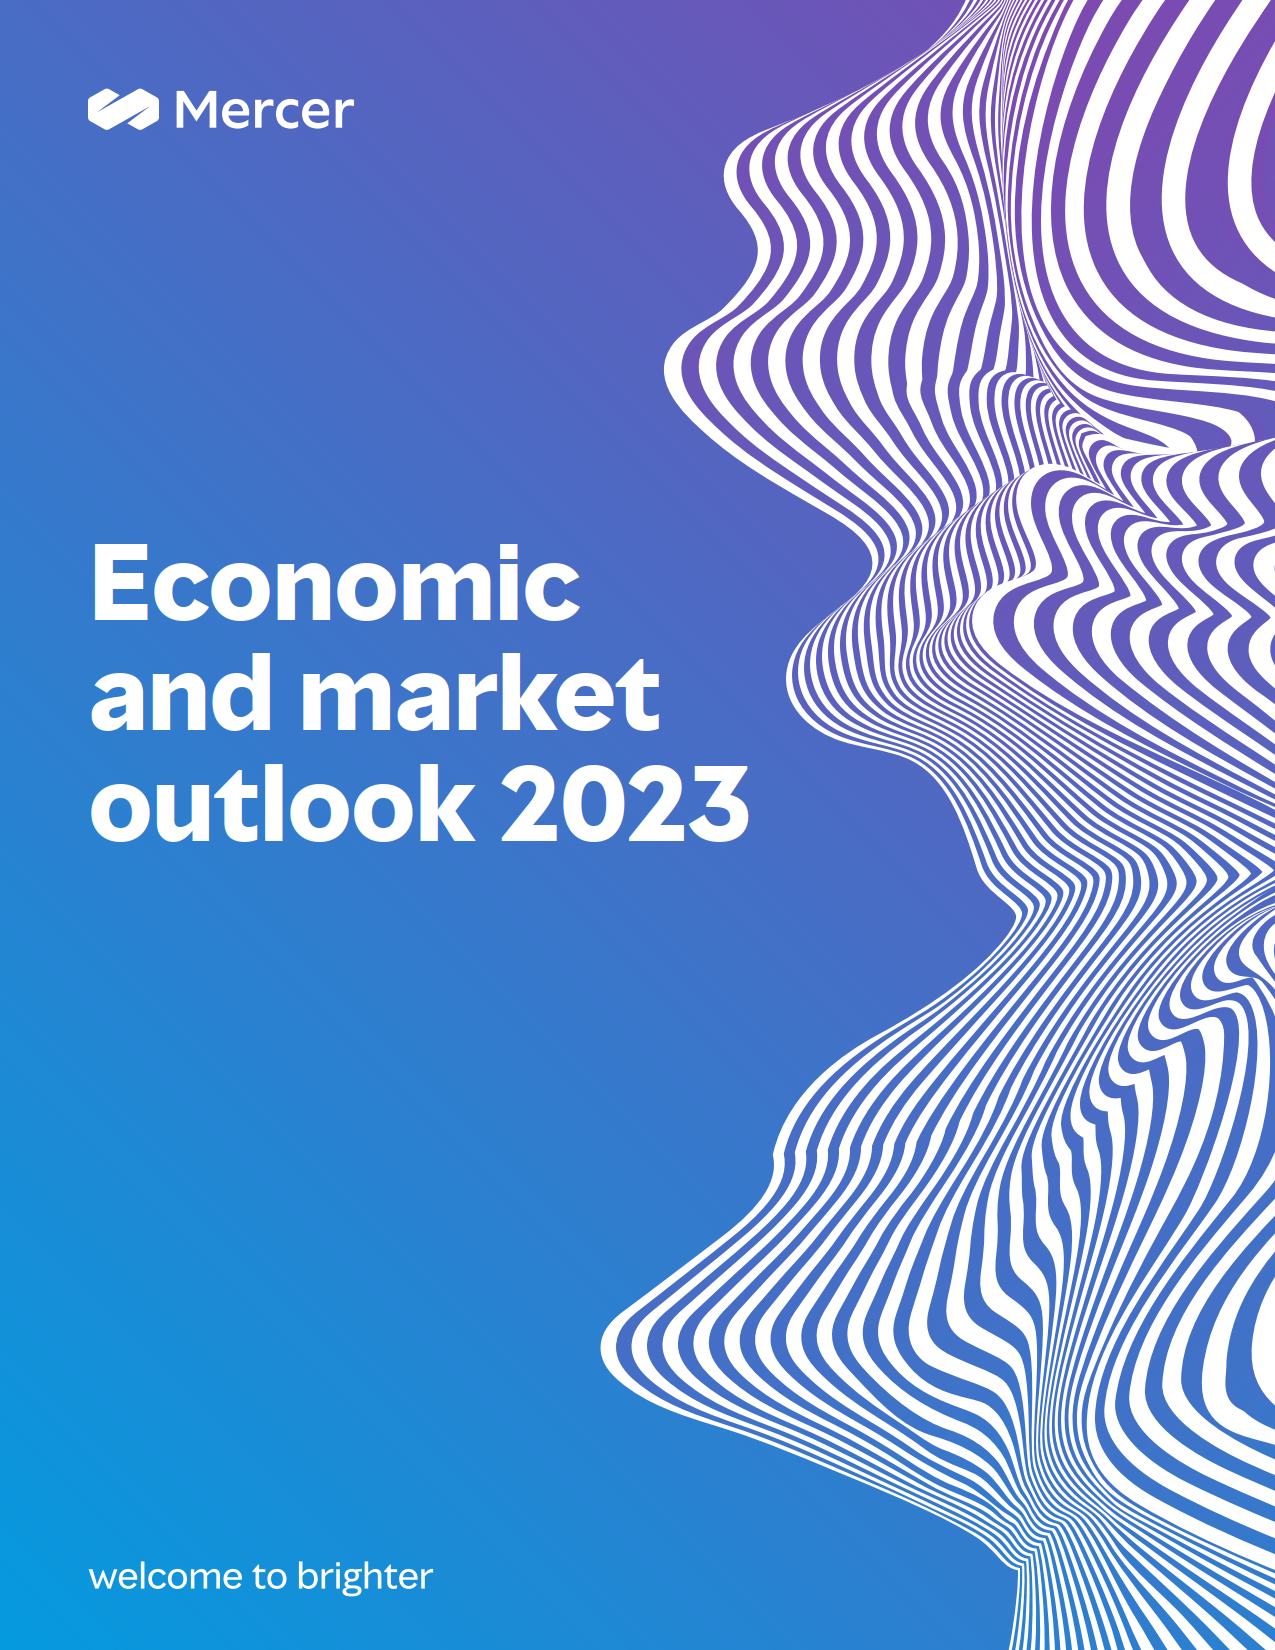 Three Key Investment Themes in 2022